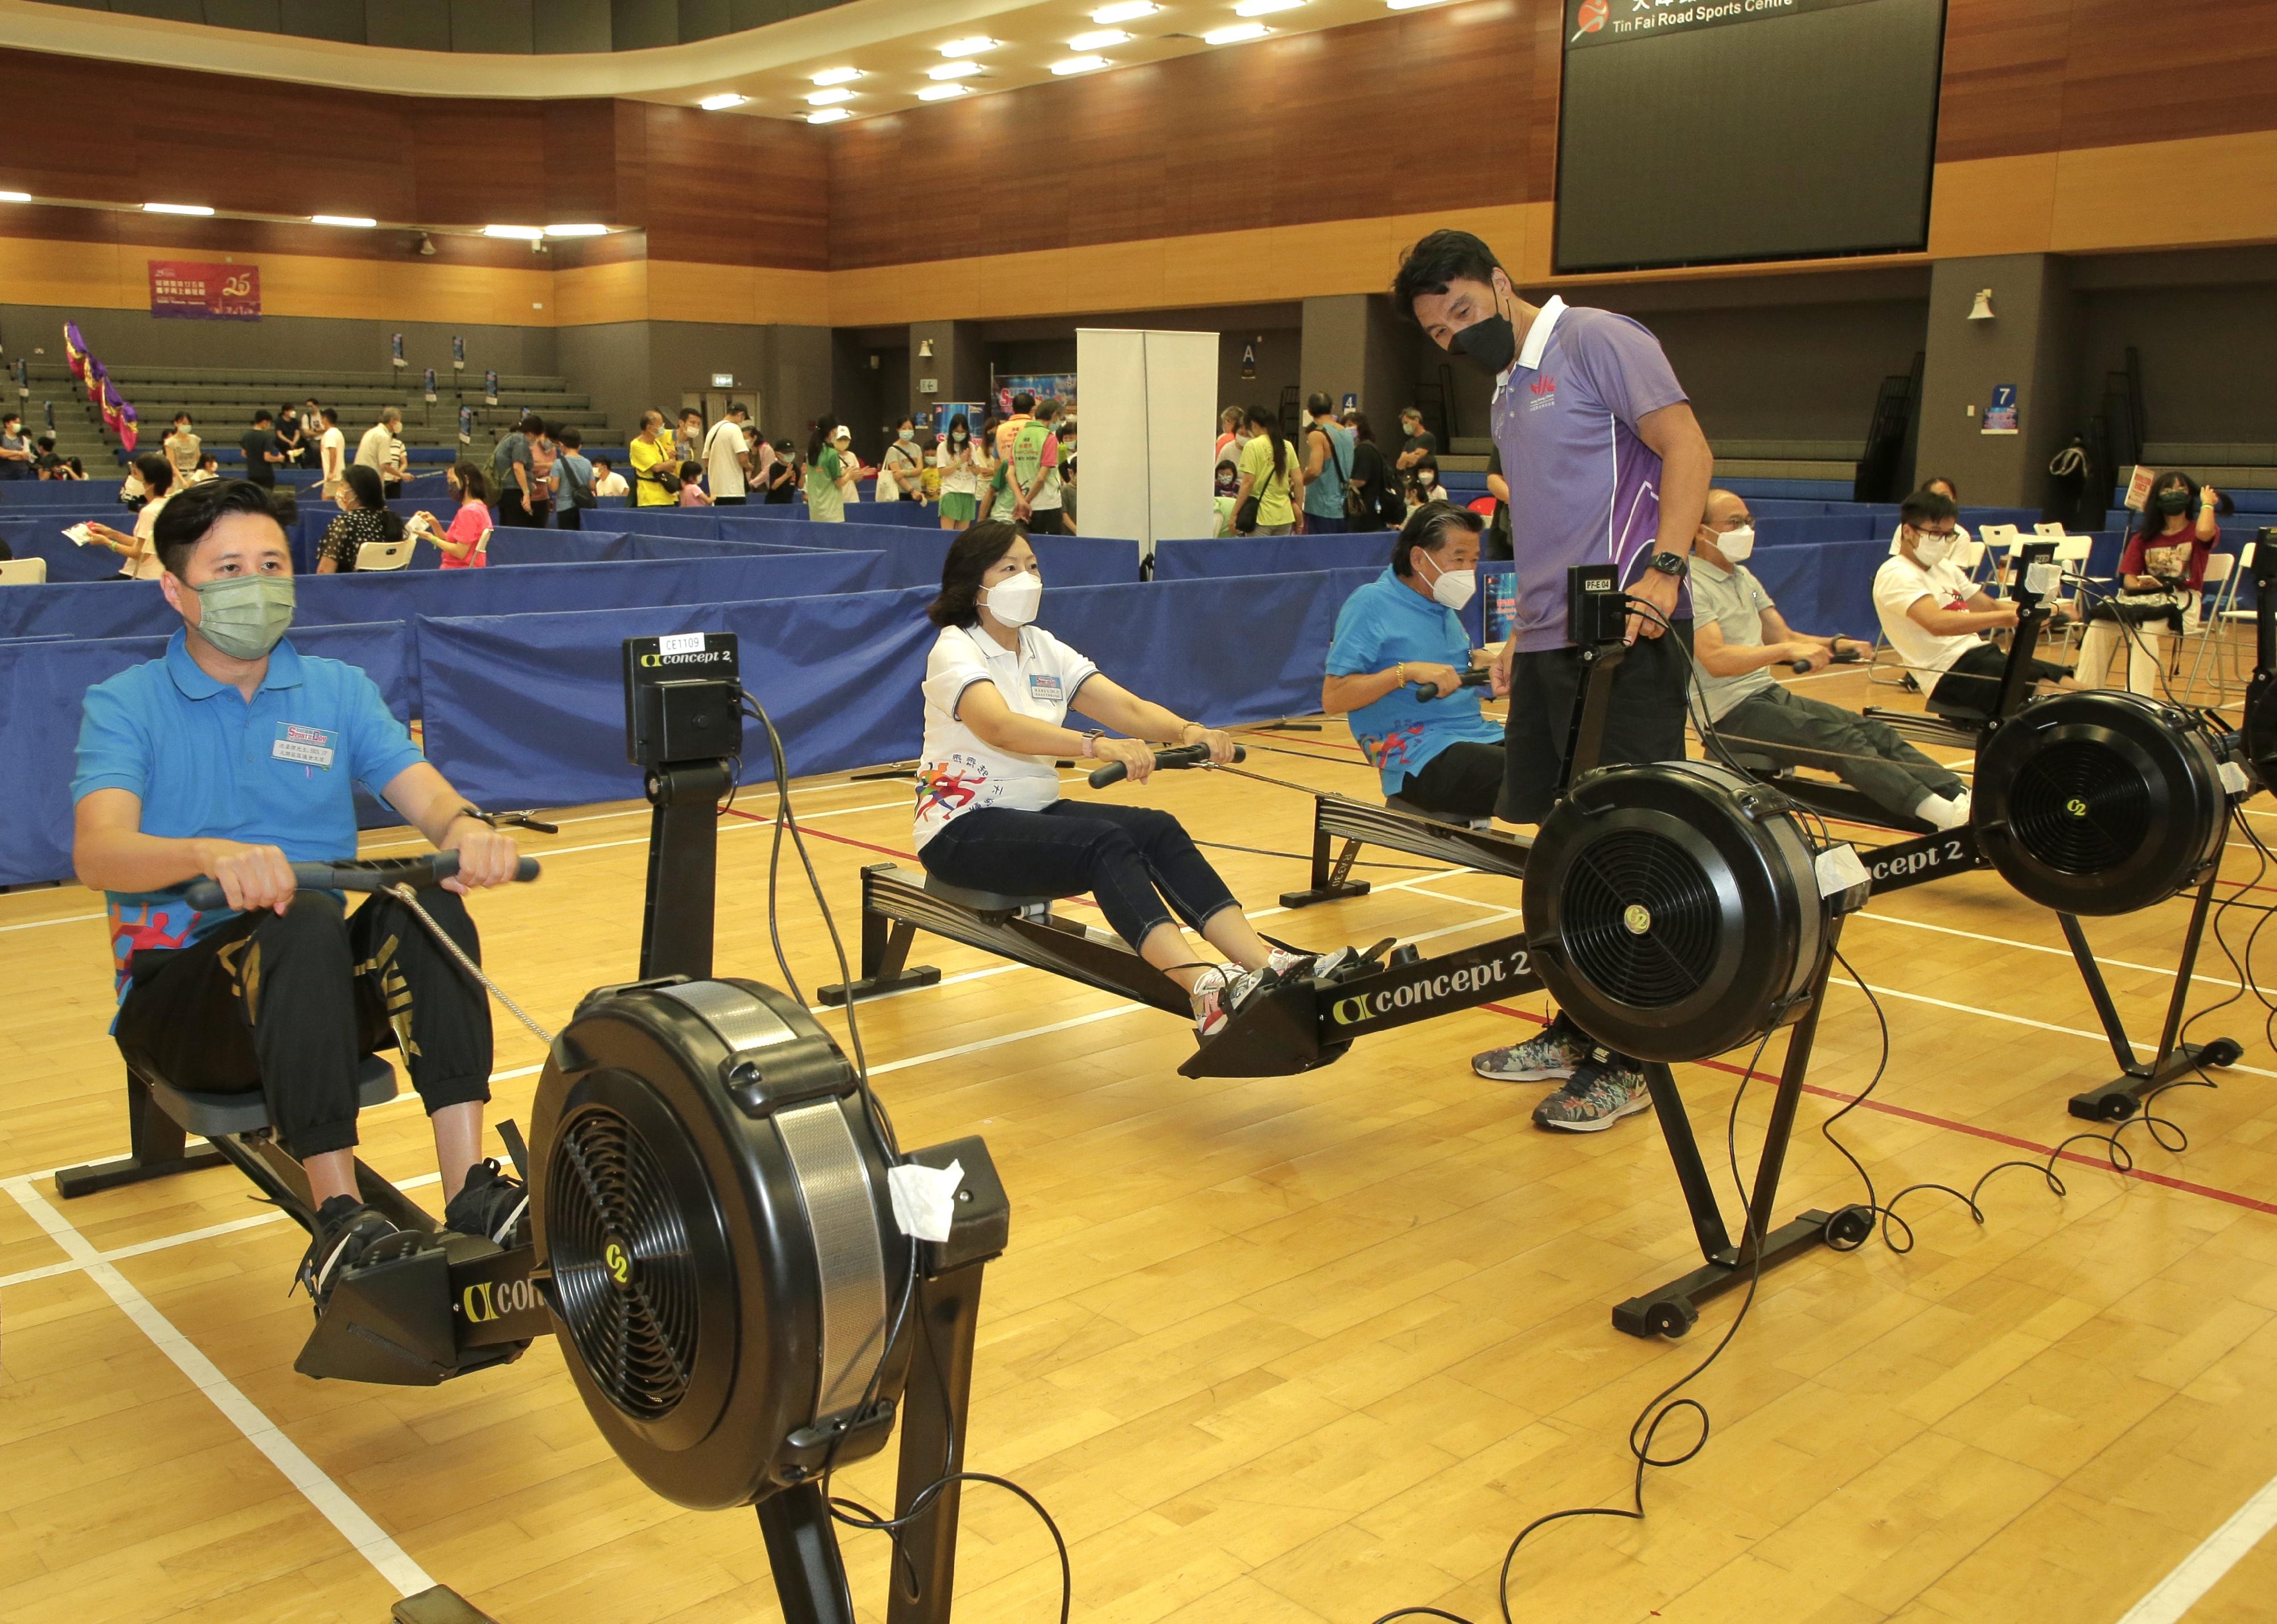 The Secretary for Home and Youth Affairs, Miss Alice Mak, today (August 7) participated in Sport For All Day 2022 activities at the Tin Fai Road Sports Centre in Yuen Long District to bring the message of stay active, healthy and happy to the public. Photo shows Miss Mak (second left) joining members of the public in an indoor rowing session to experience the fun of electronic virtual sport.
